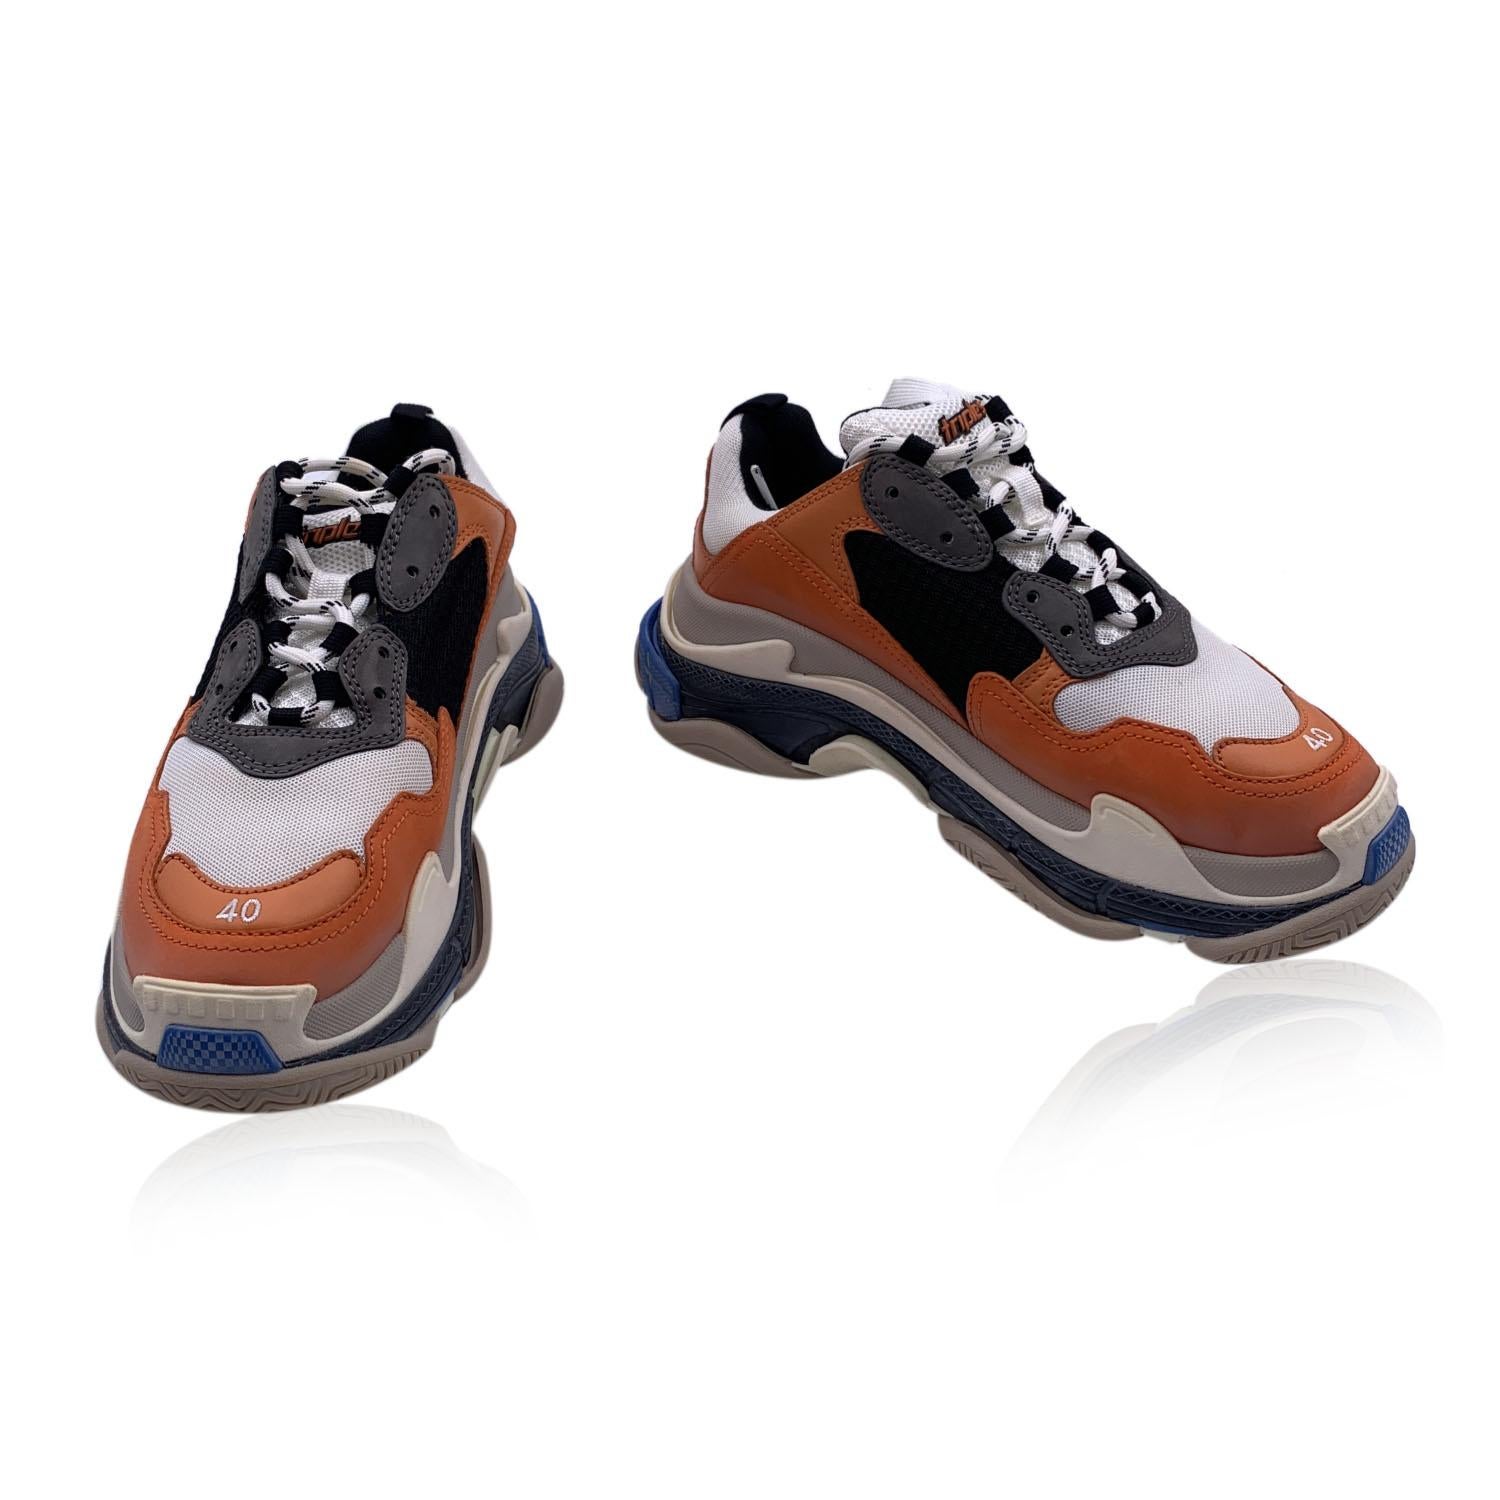 Beautiful Balenciaga 'Triple S' Sneakers. Chunky design. They feature triple layer sole, Balenciaga logo embroidered on the side and on the back, and lace up closure. The size is embroidered on the toes. Imported. Colors: Orange, White, Black, Blue.